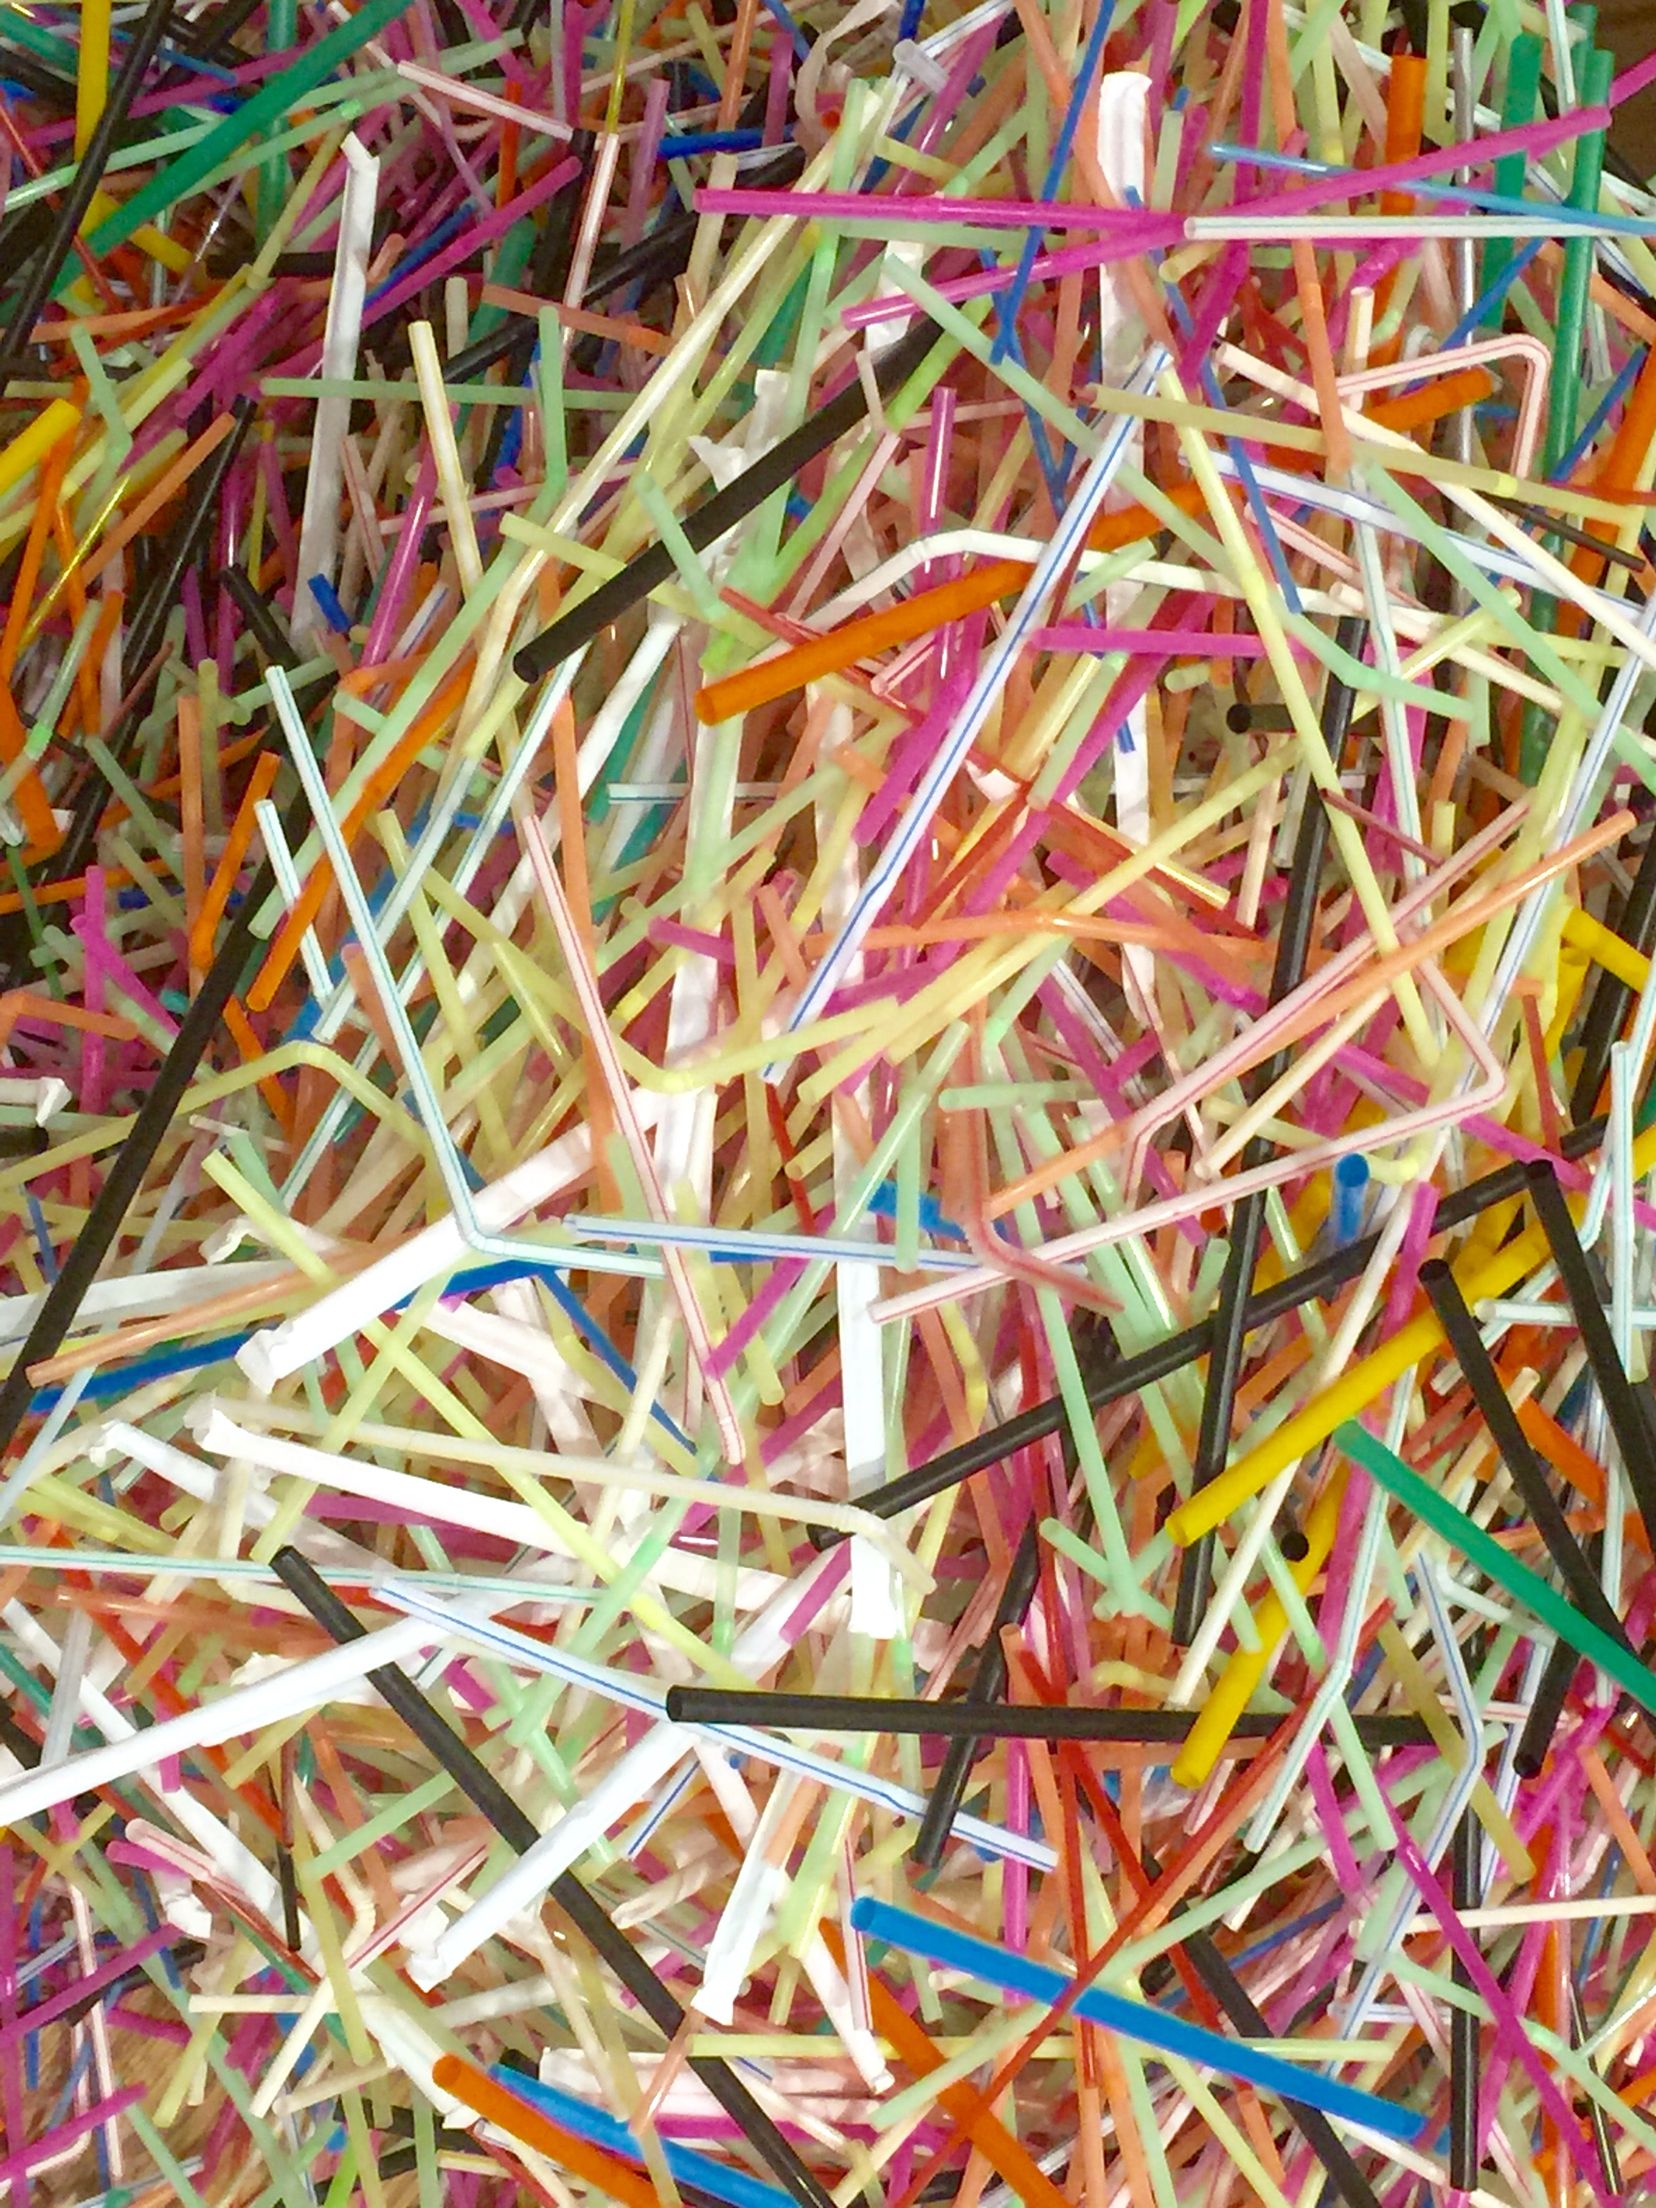 Straws at MoMA art installation | Textures and Beauty | Pinterest ...